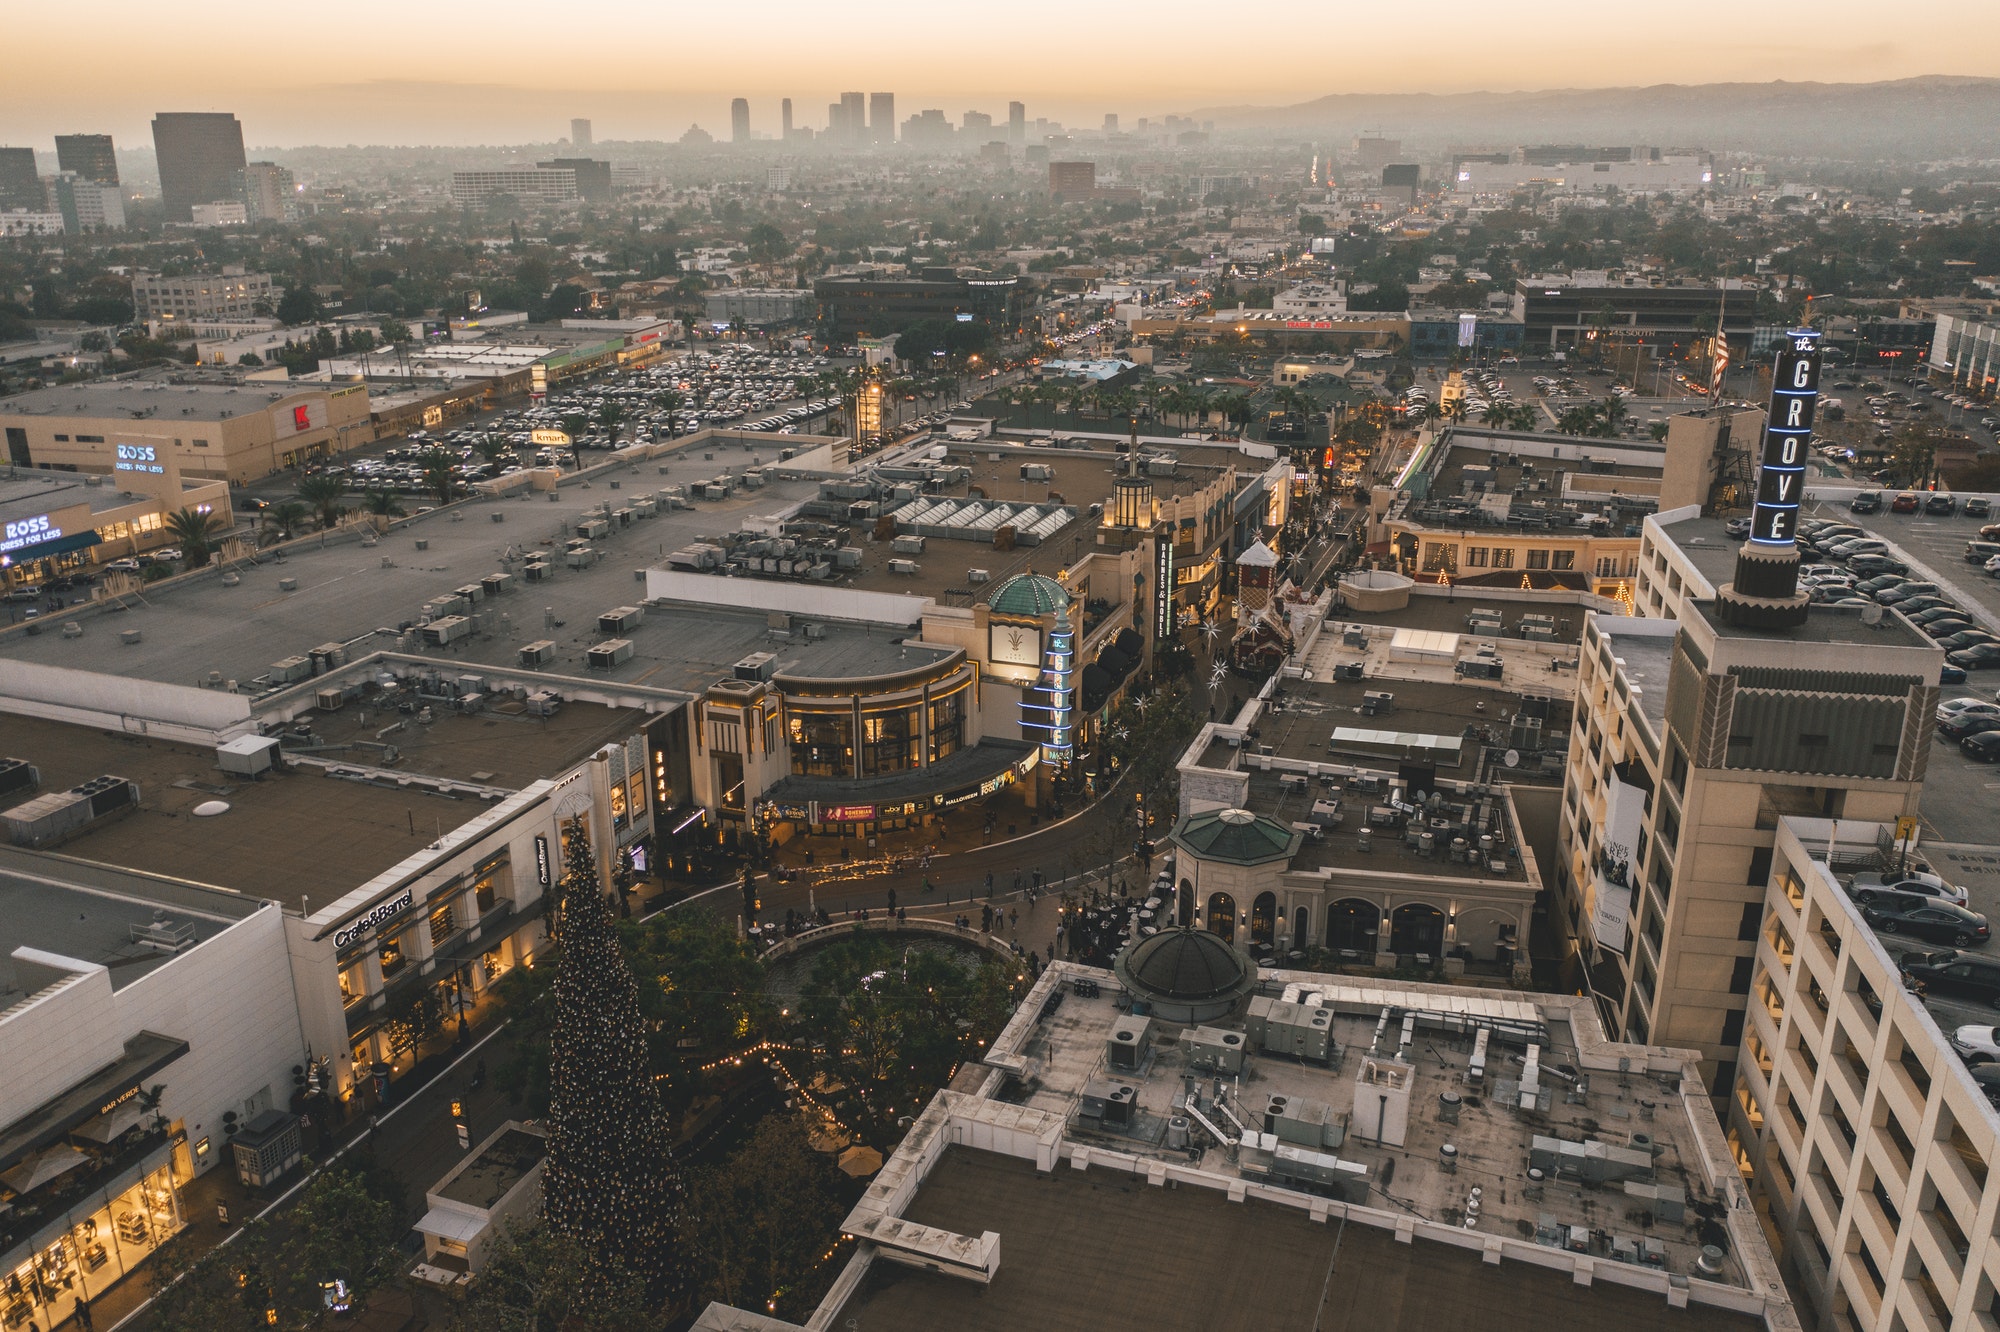 The Grove Shopping Center in Los Angeles at Sunset with Shops and Hollywood Skyline in the distance